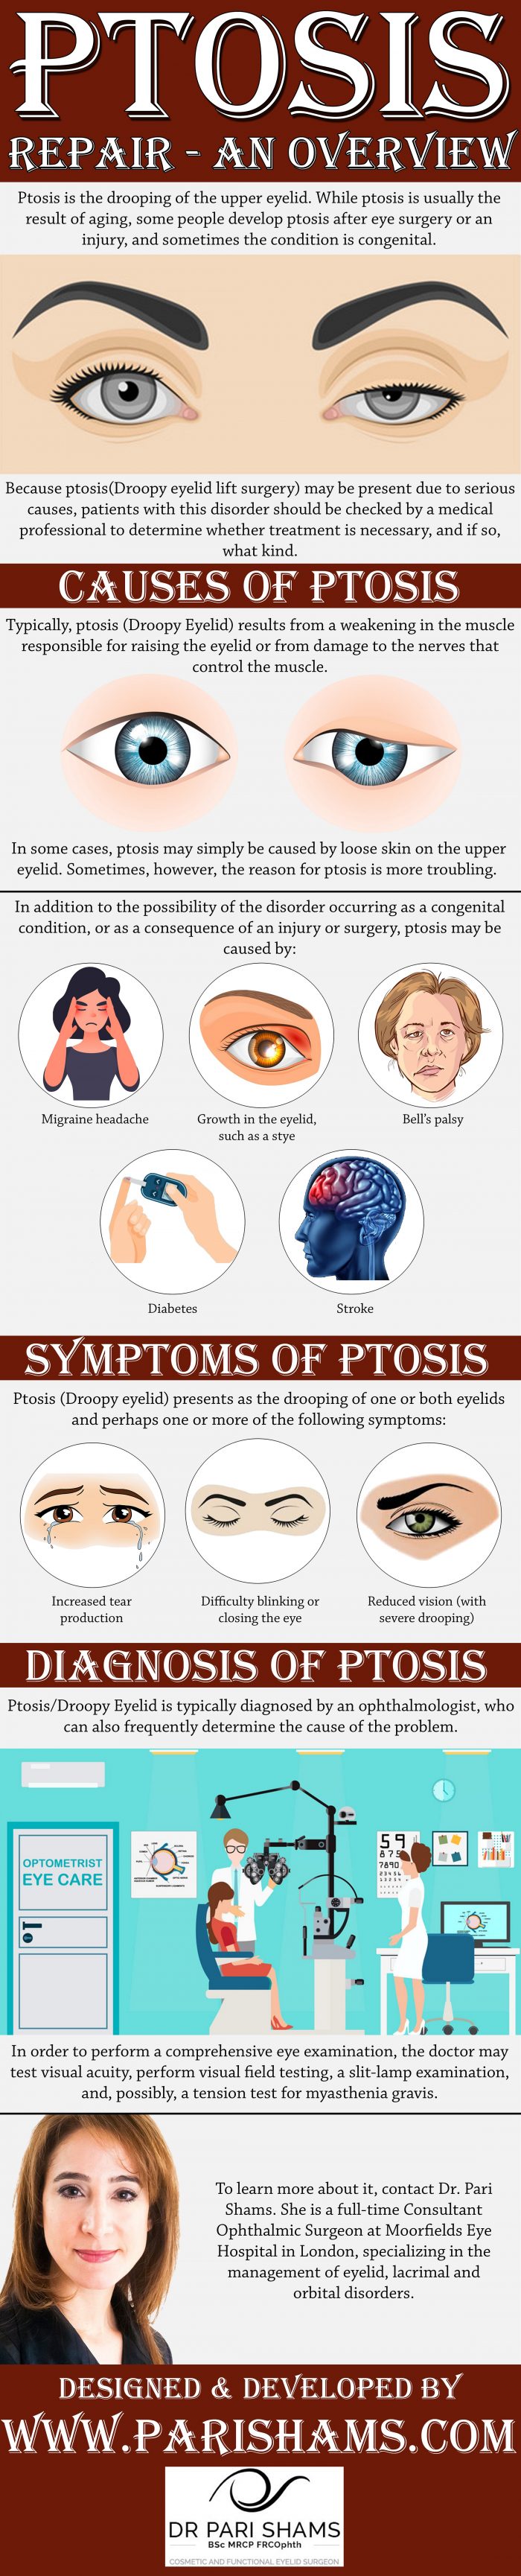 Ptosis Repair – An Overview